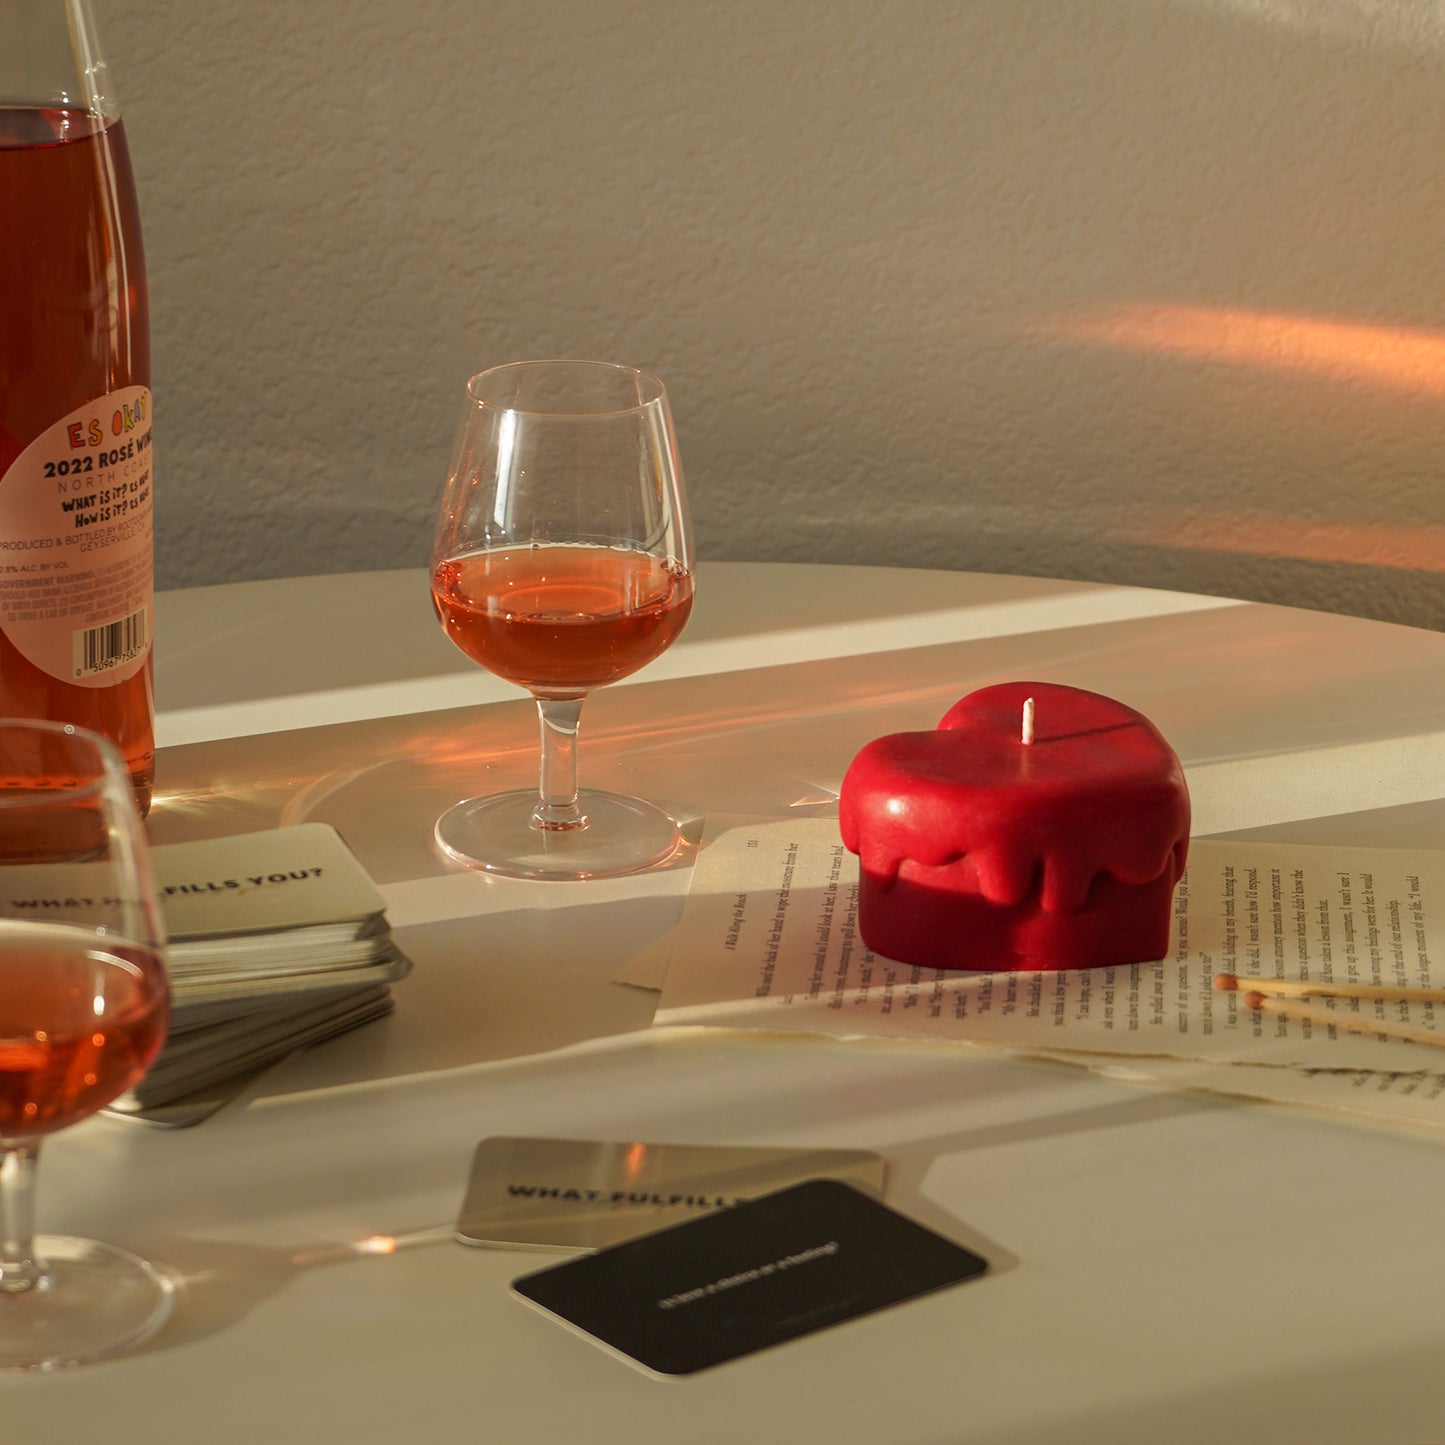 red melting heart candle and matches on book pages, a glass of rose wine, a bottle of rose and card on the white round table